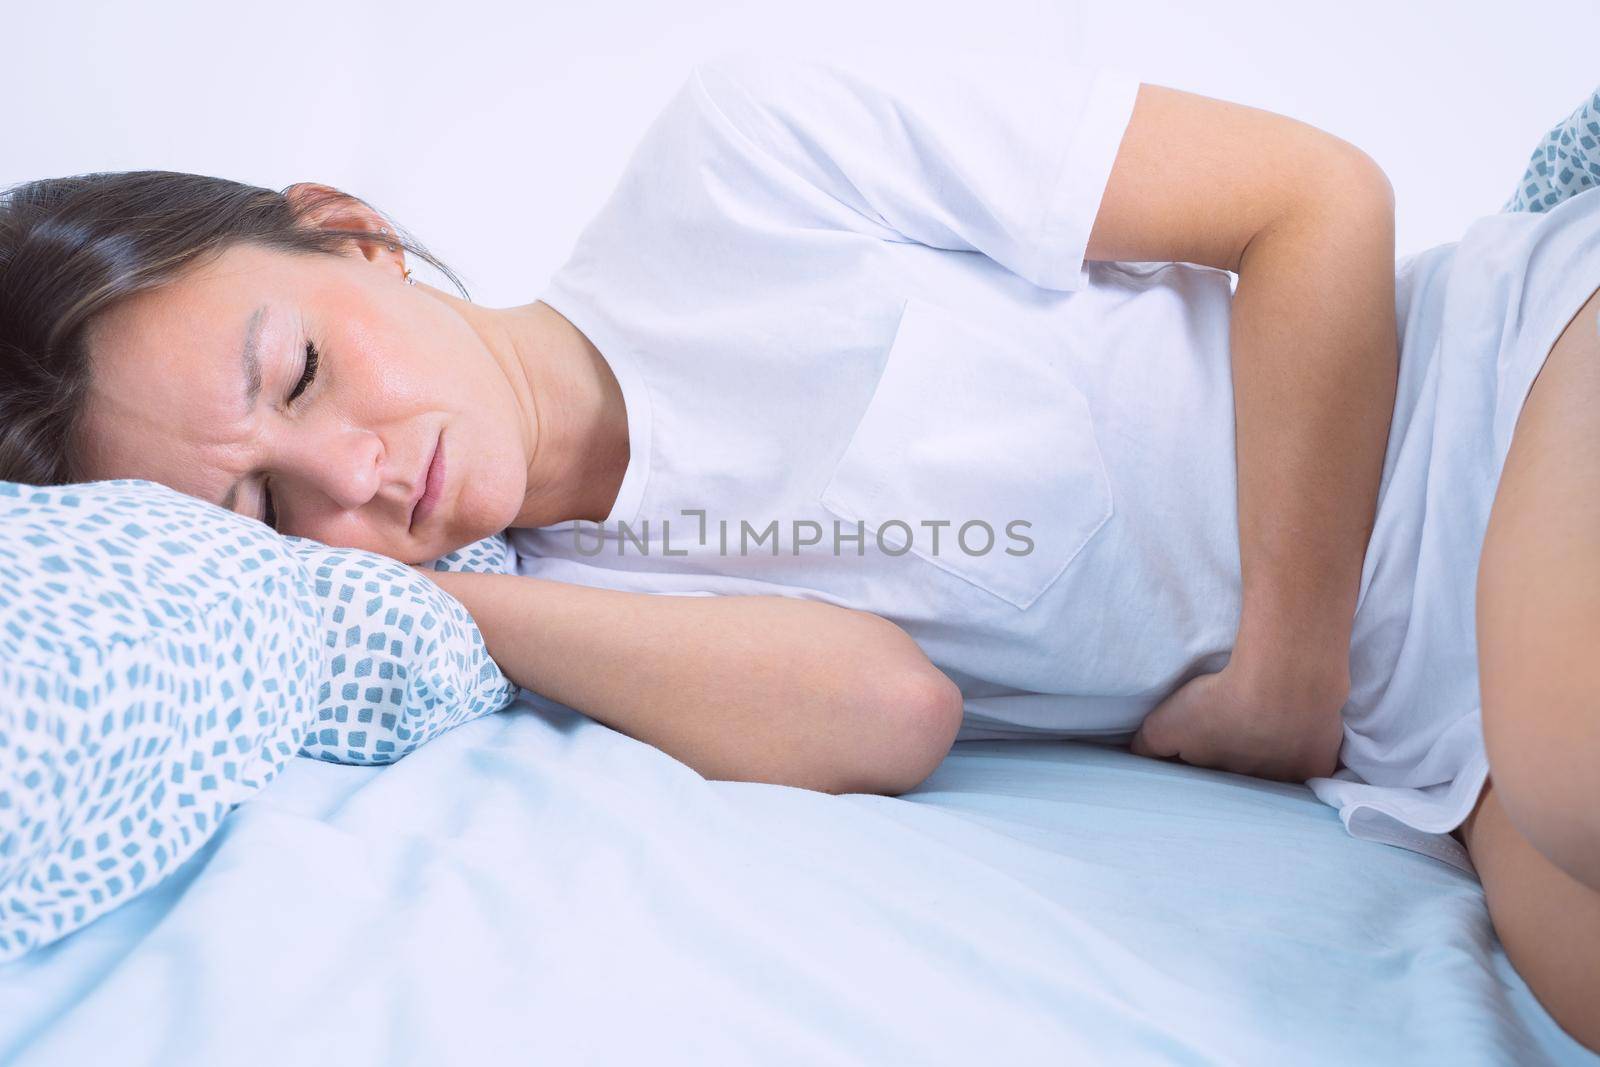 Young woman lying in the bed and suffering from gynecological problems, menstruation pain, stomach ache or abdominal pain. Menstruation period or PMS by DariaKulkova